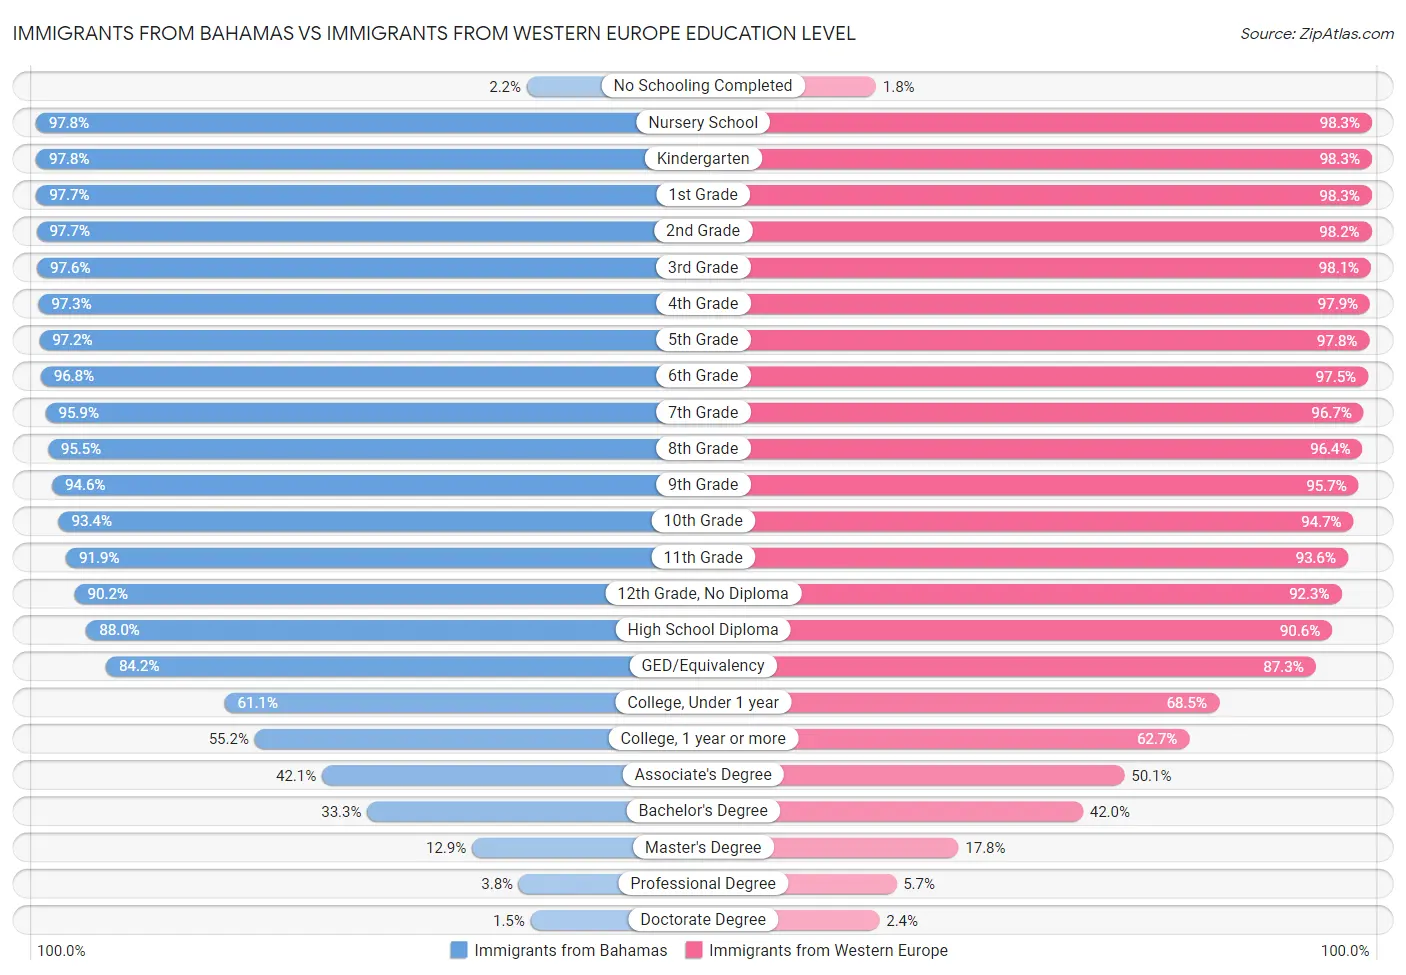 Immigrants from Bahamas vs Immigrants from Western Europe Education Level